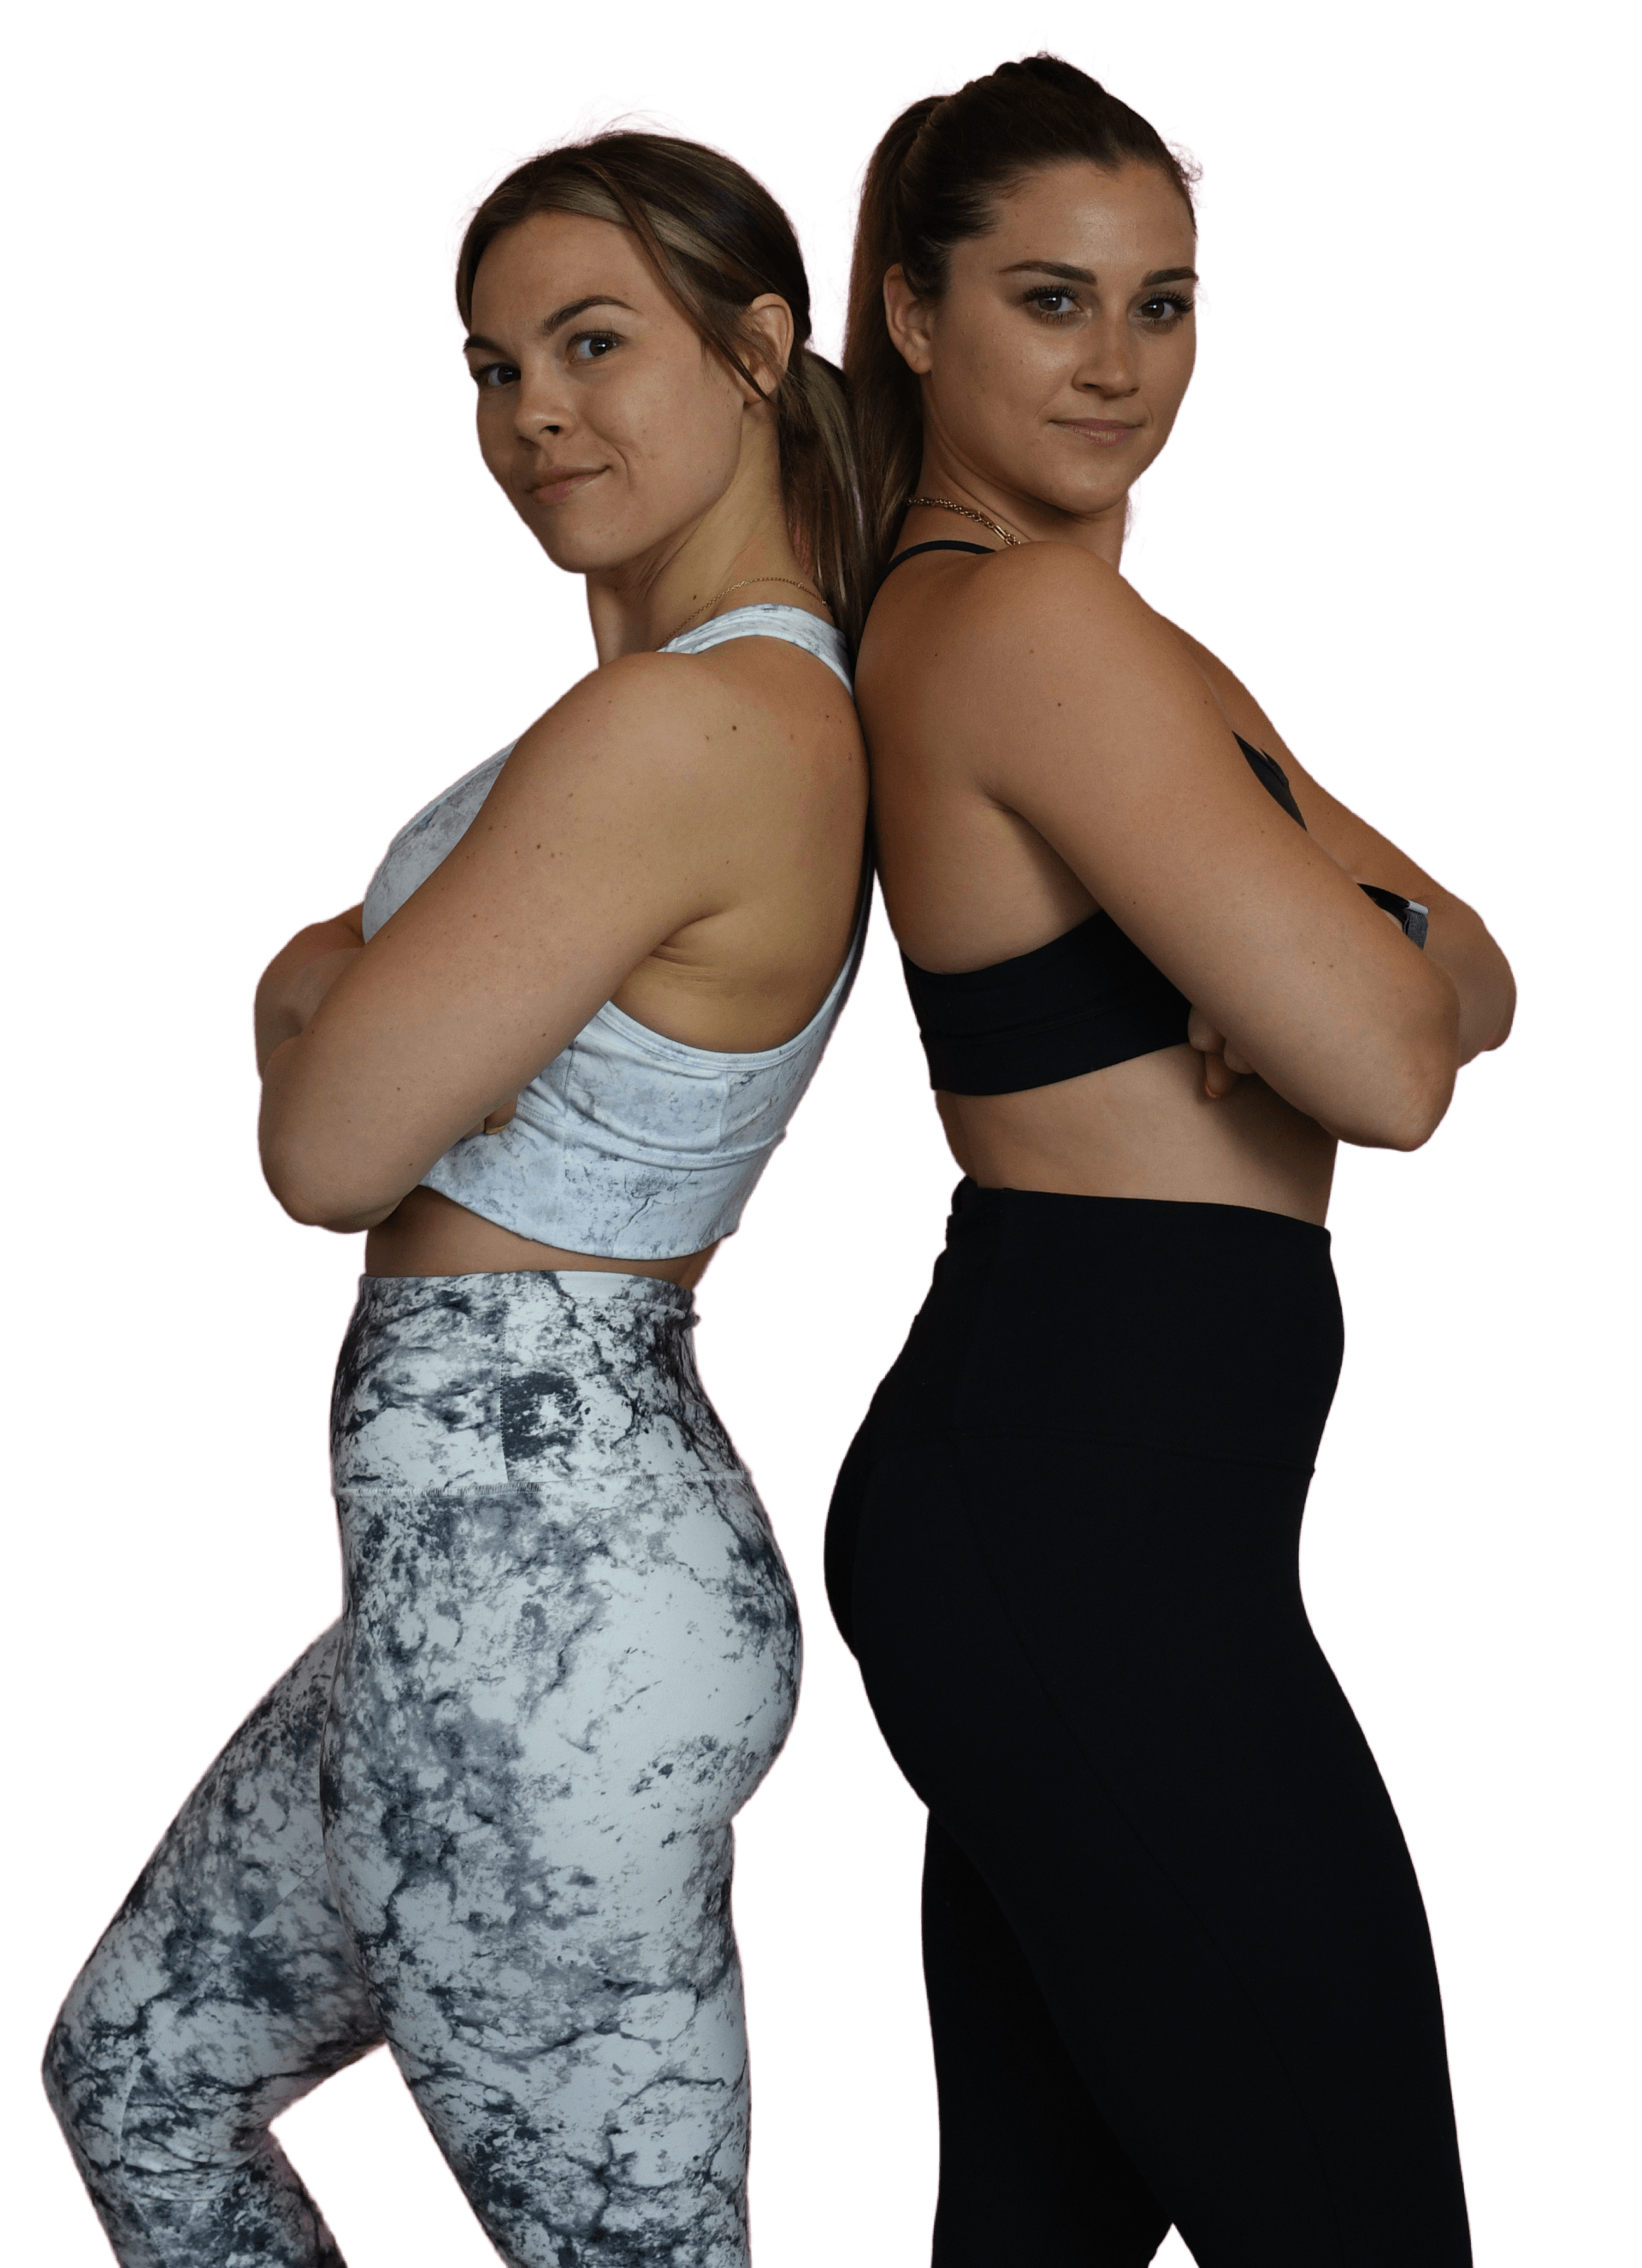 Alexa and Meg, two of the top yoga and pilates teachers on long island standing back to back with their arms crossed